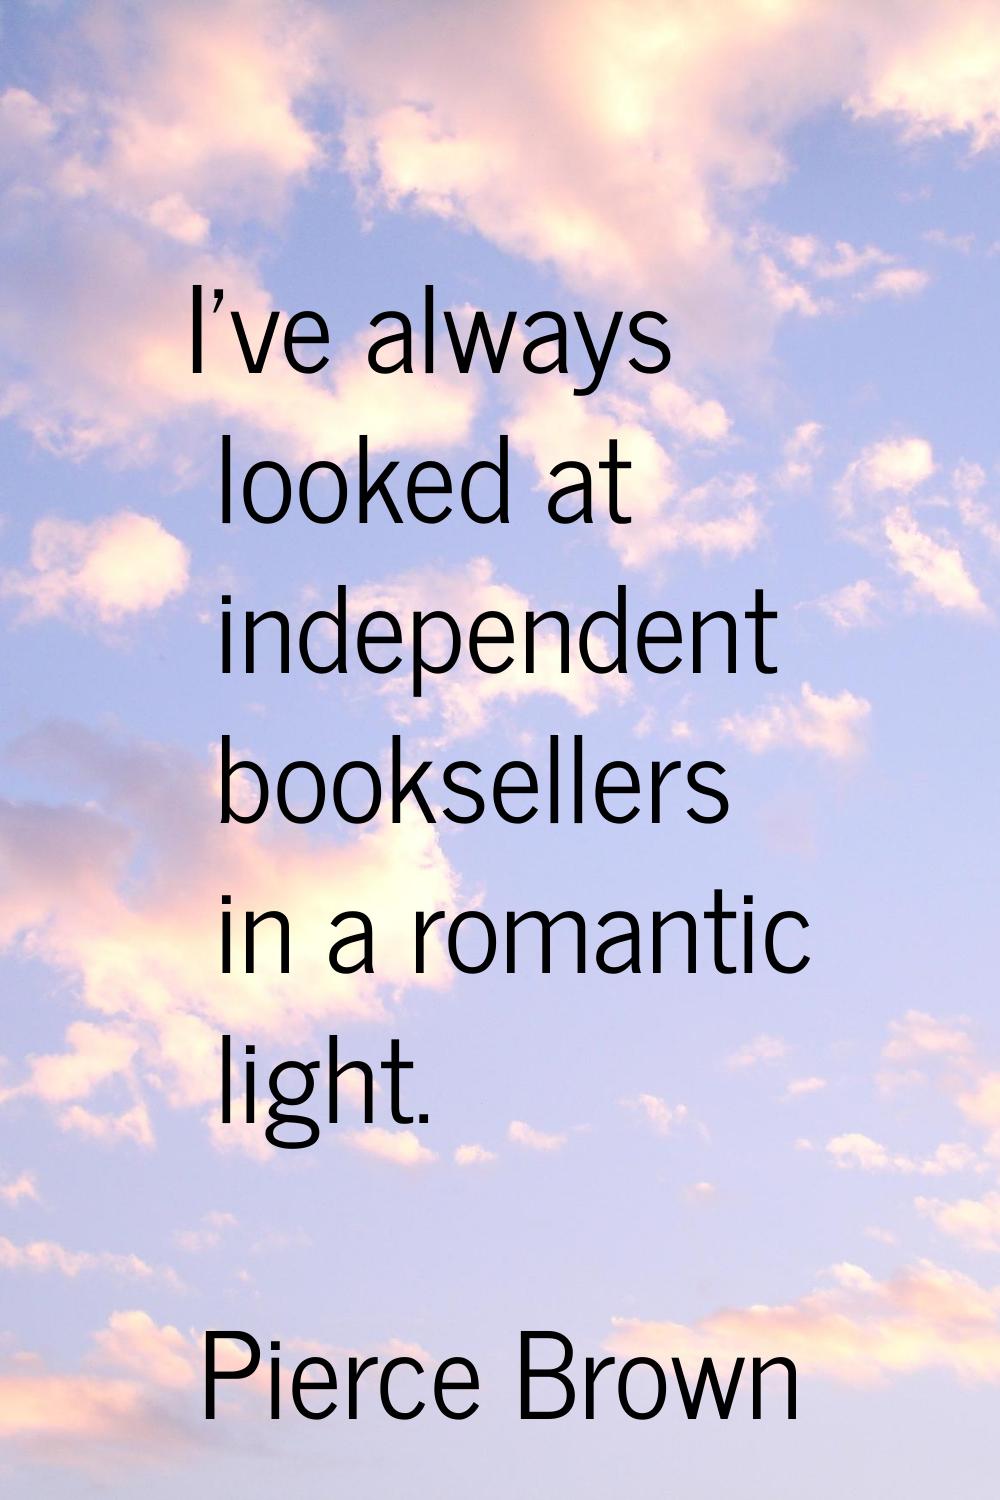 I've always looked at independent booksellers in a romantic light.